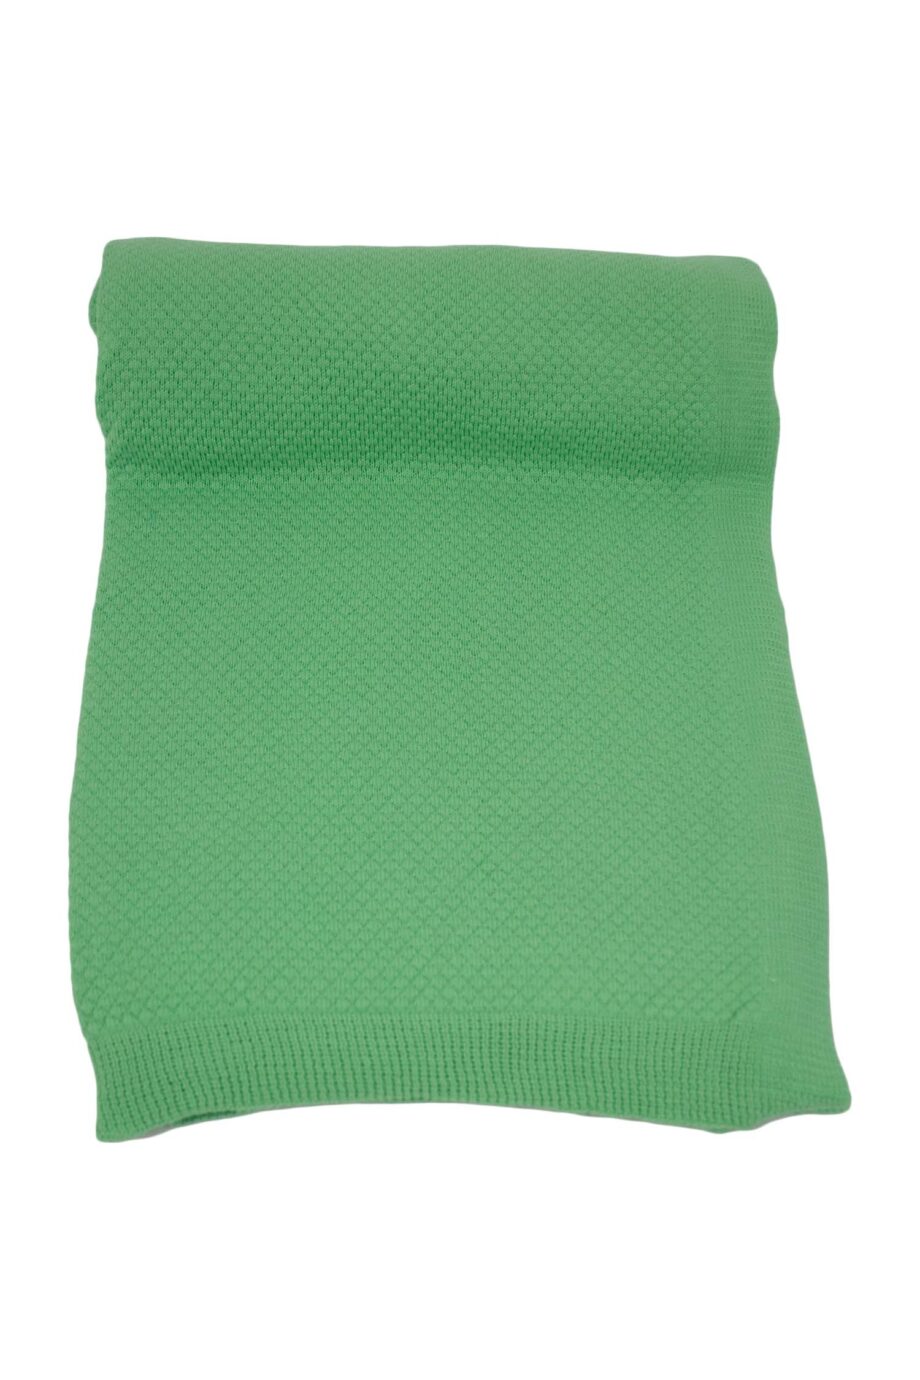 liz mint knitted cotton throw large